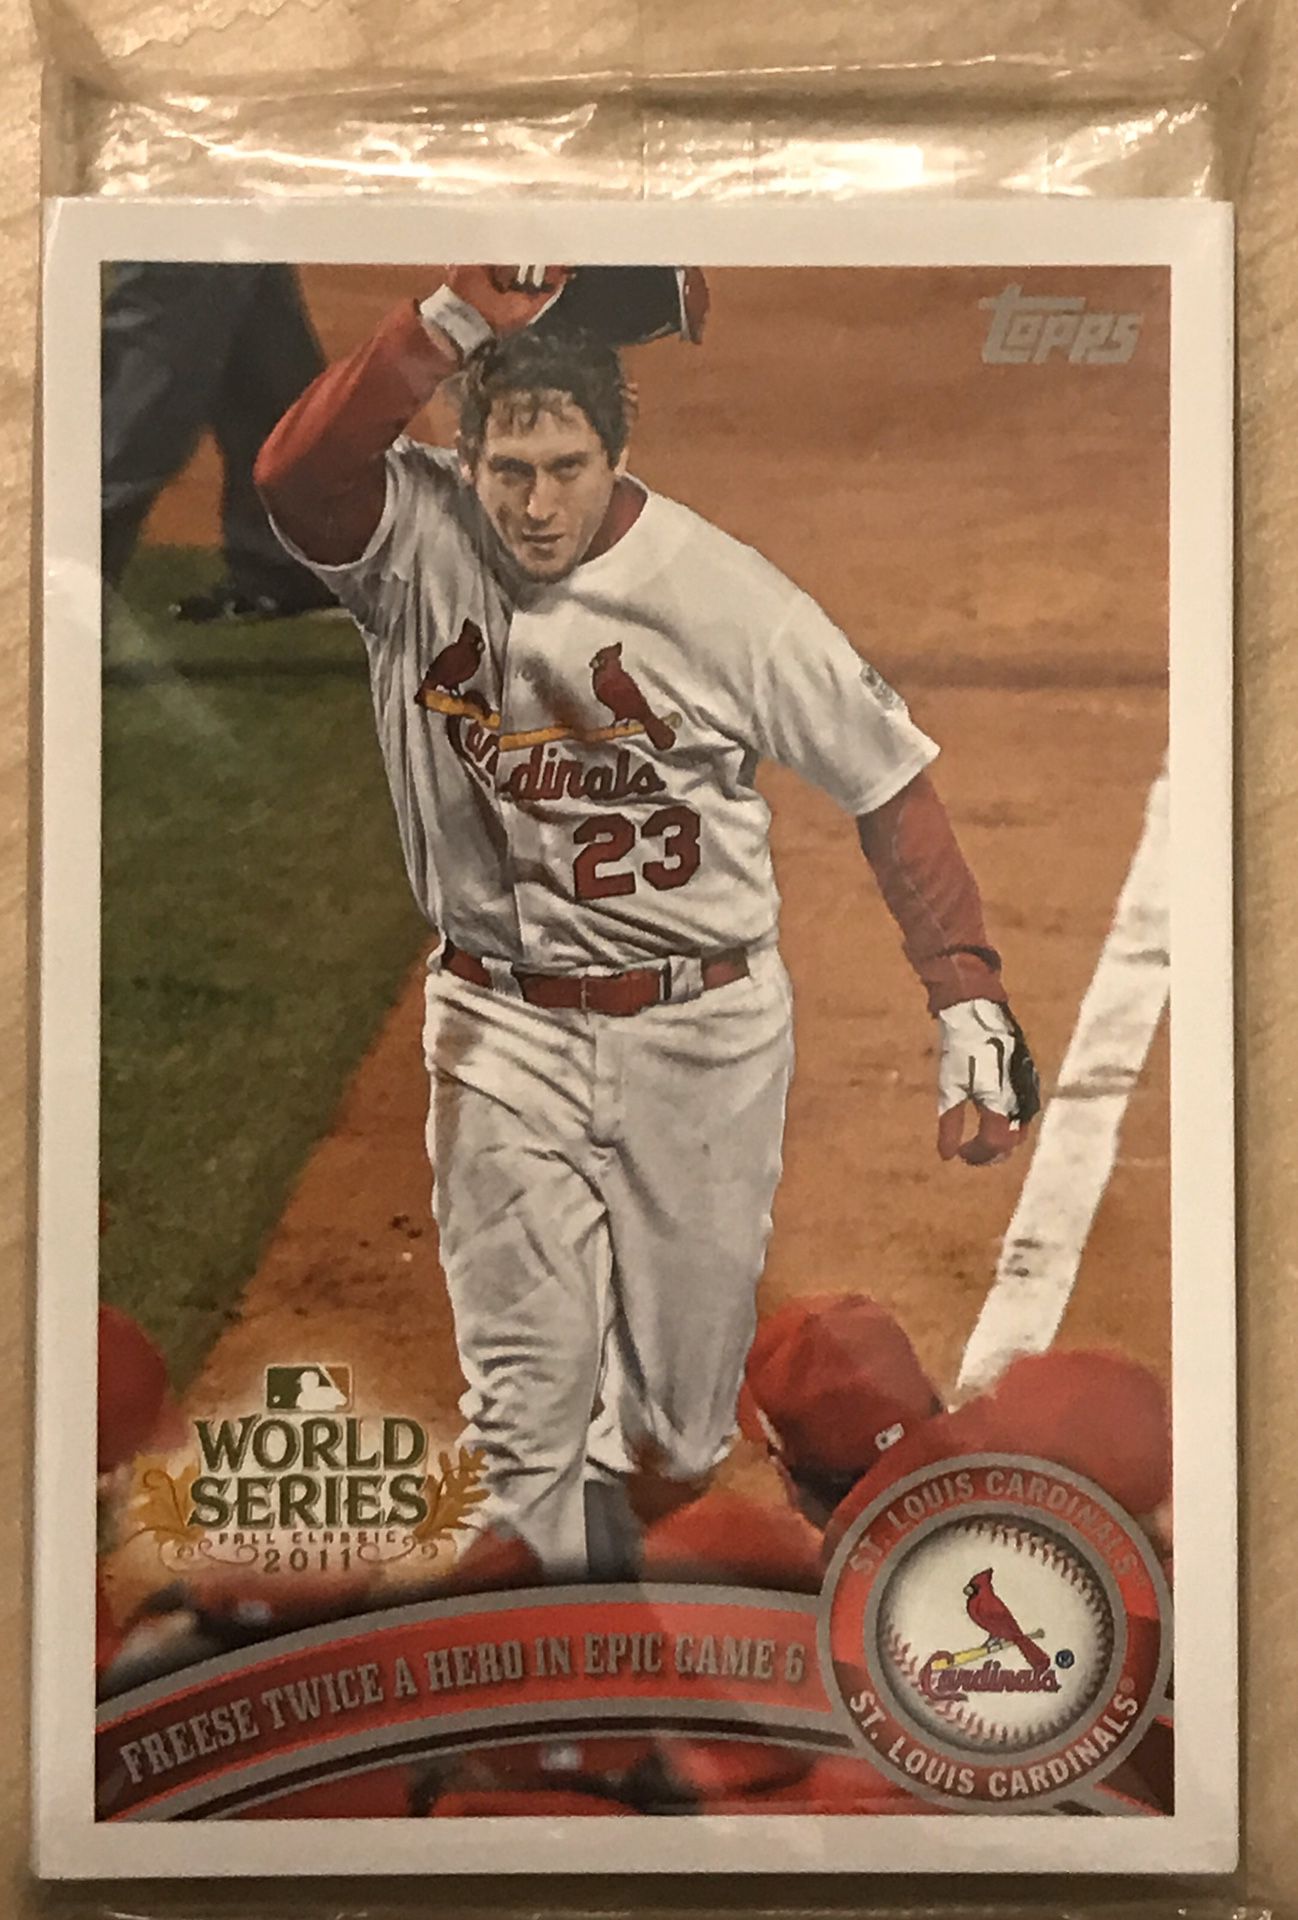 Cardinals Trading Card Package